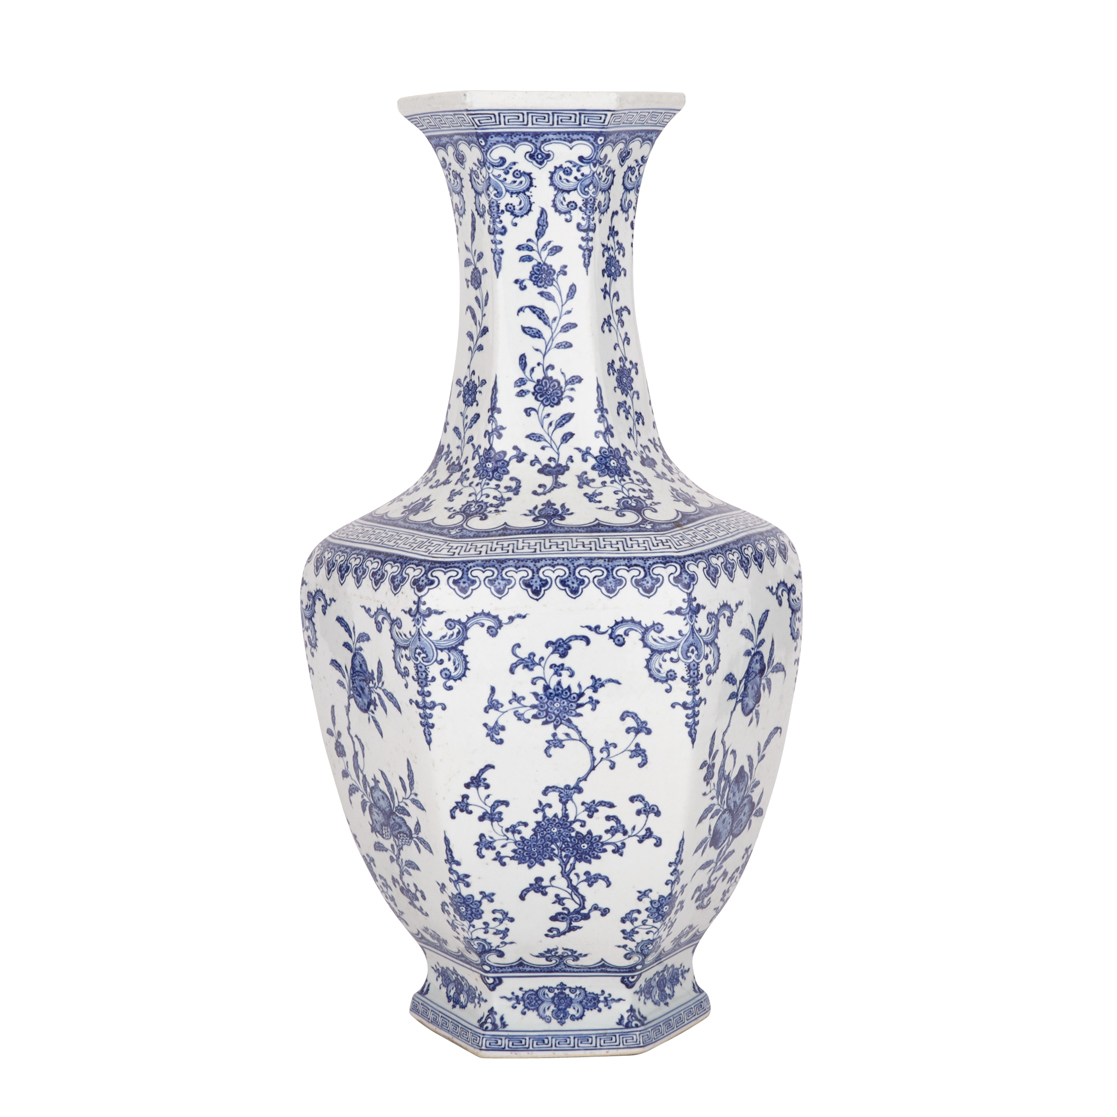 A Very Fine Imperial Style Blue and White Hexagonal Vase, Qianlong Six-Character Seal Mark, Late 19th Century


